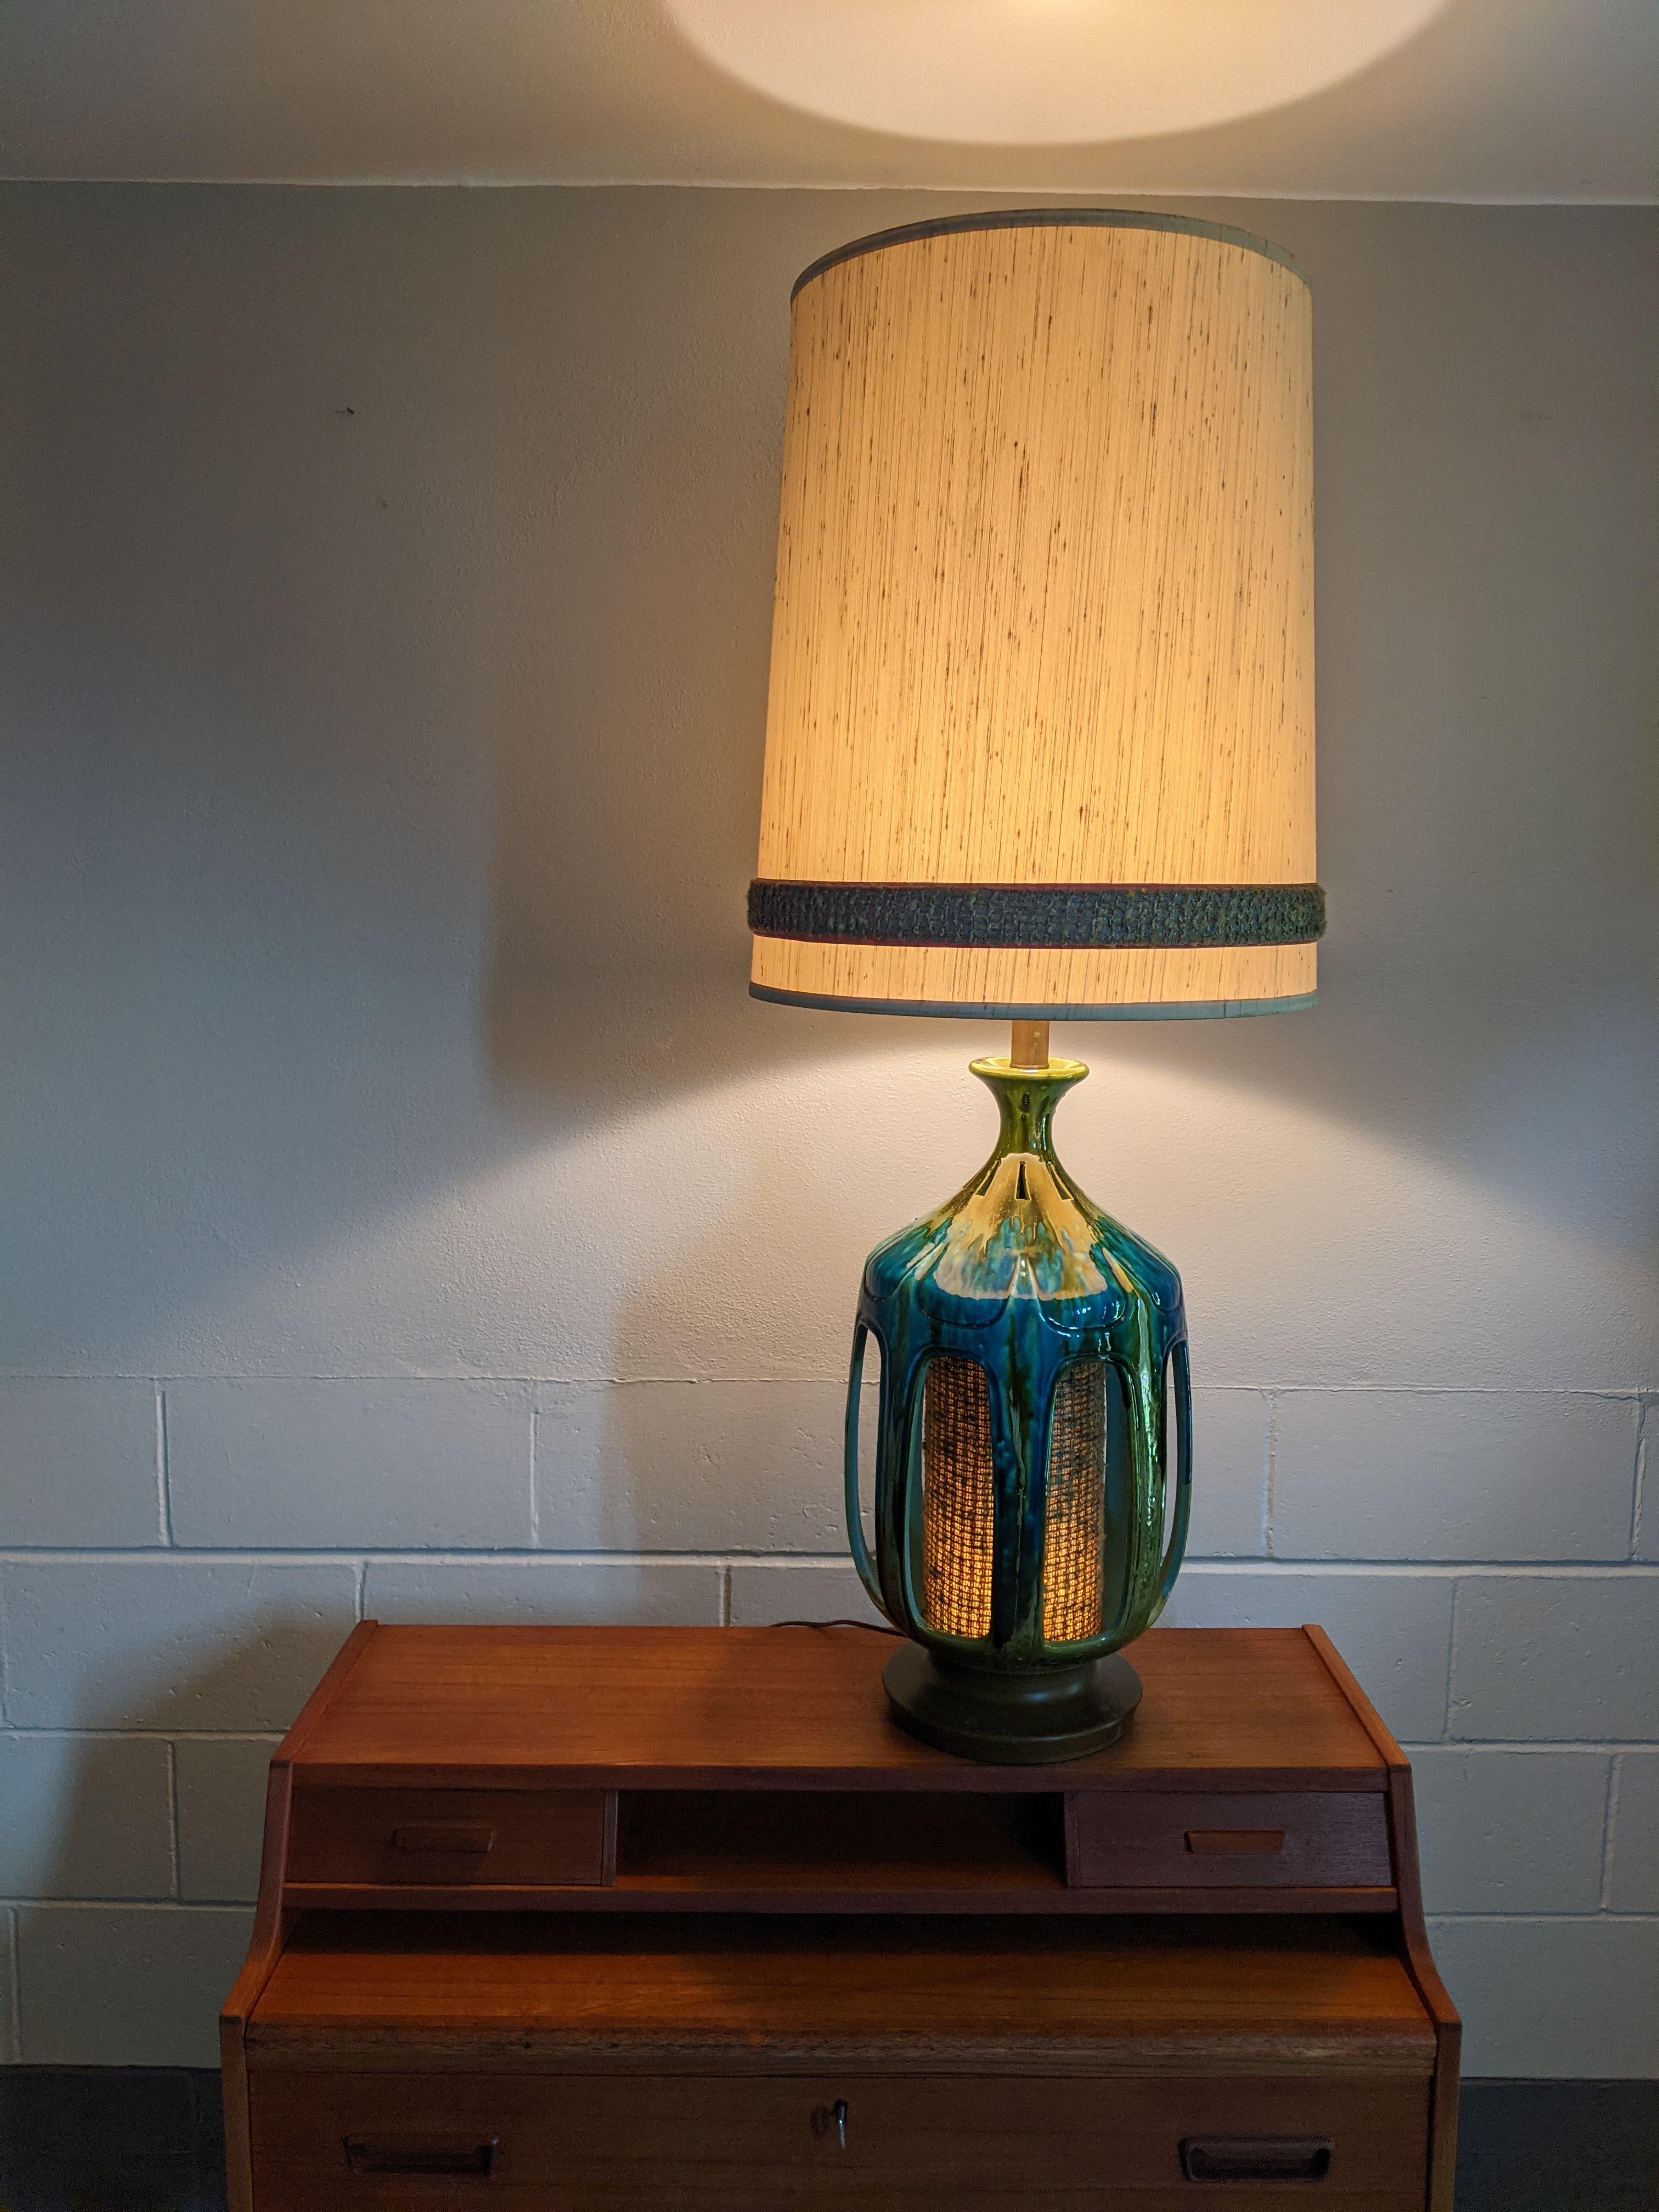 Large vintage Honi Chilo lamp with original shade, circa 1970s.

Blue/Green gloss drip glaze. Switches on base and neck, inside of base lights up with fabric to match the shade.

Excellent vintage condition. Very large vintage